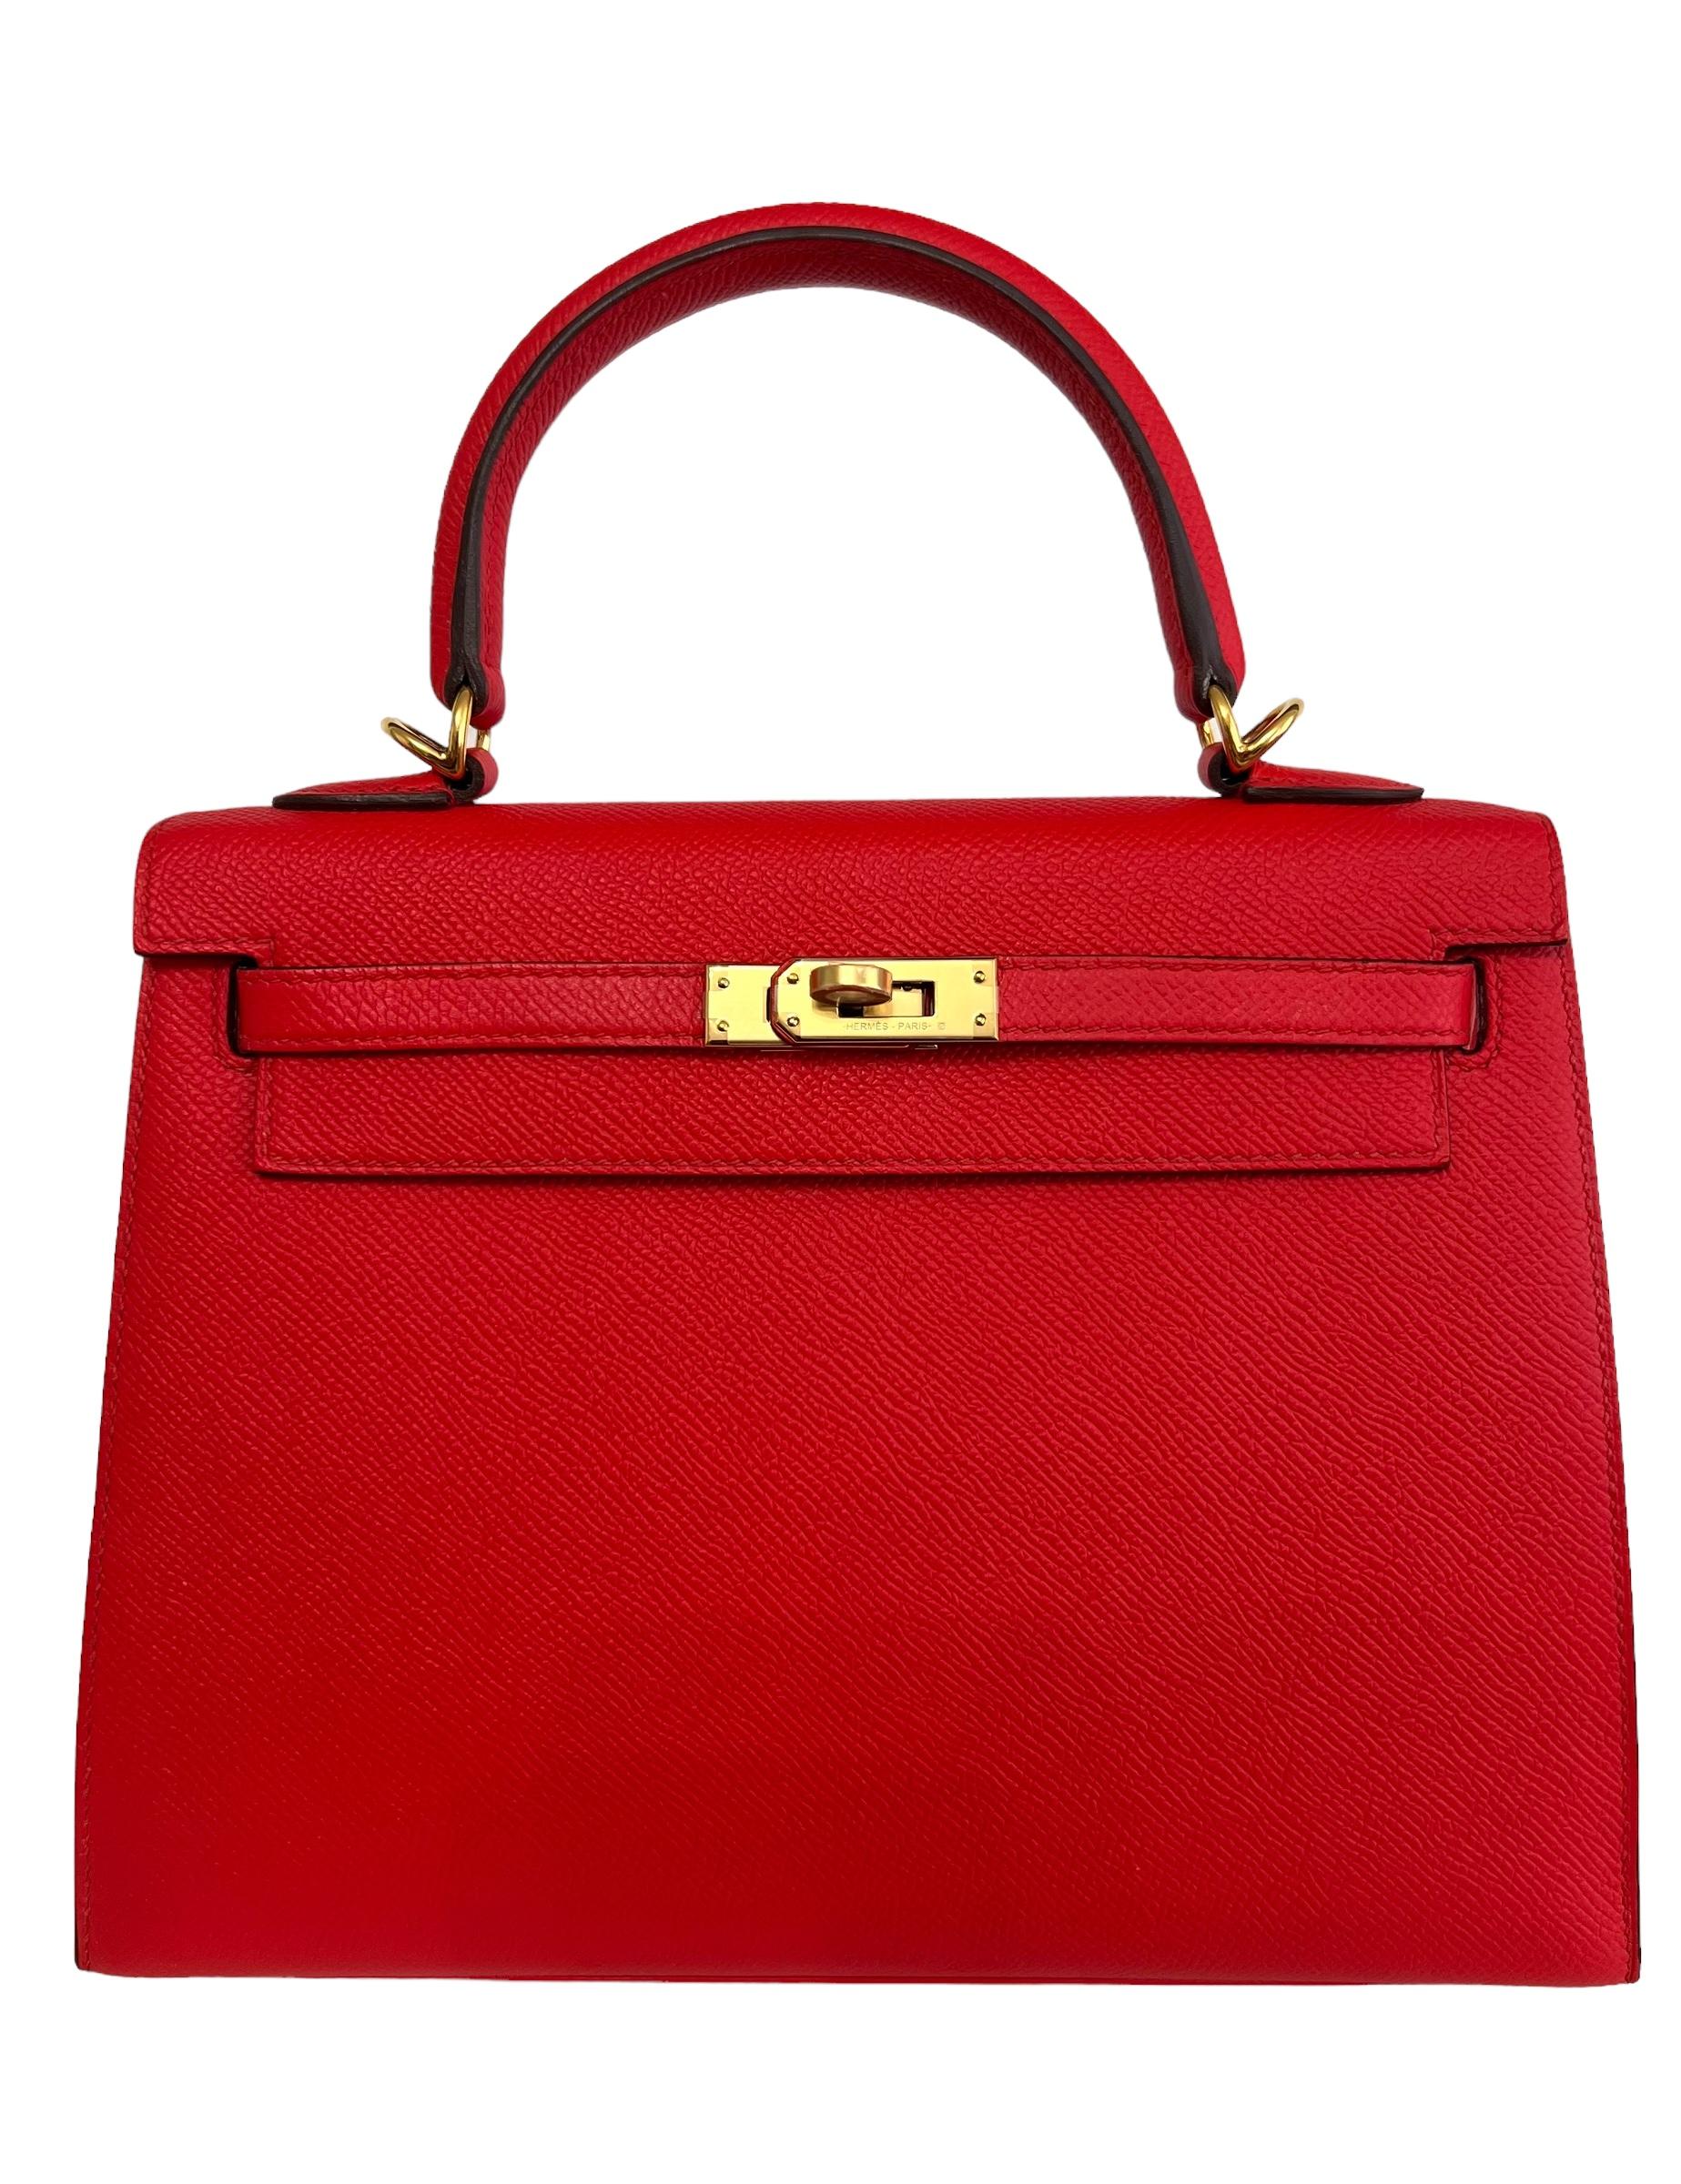 Beautiful Hermes Kelly 25 Sellier Rouge de Coeur Epsom Leather. Complimented by Gold Hardware. Pristine Condition with Plastic on all Hardware and feet. 2019 D Stamp. 

Shop with Confidence from Lux. Addicts. Authenticity Guaranteed! 

Please keep